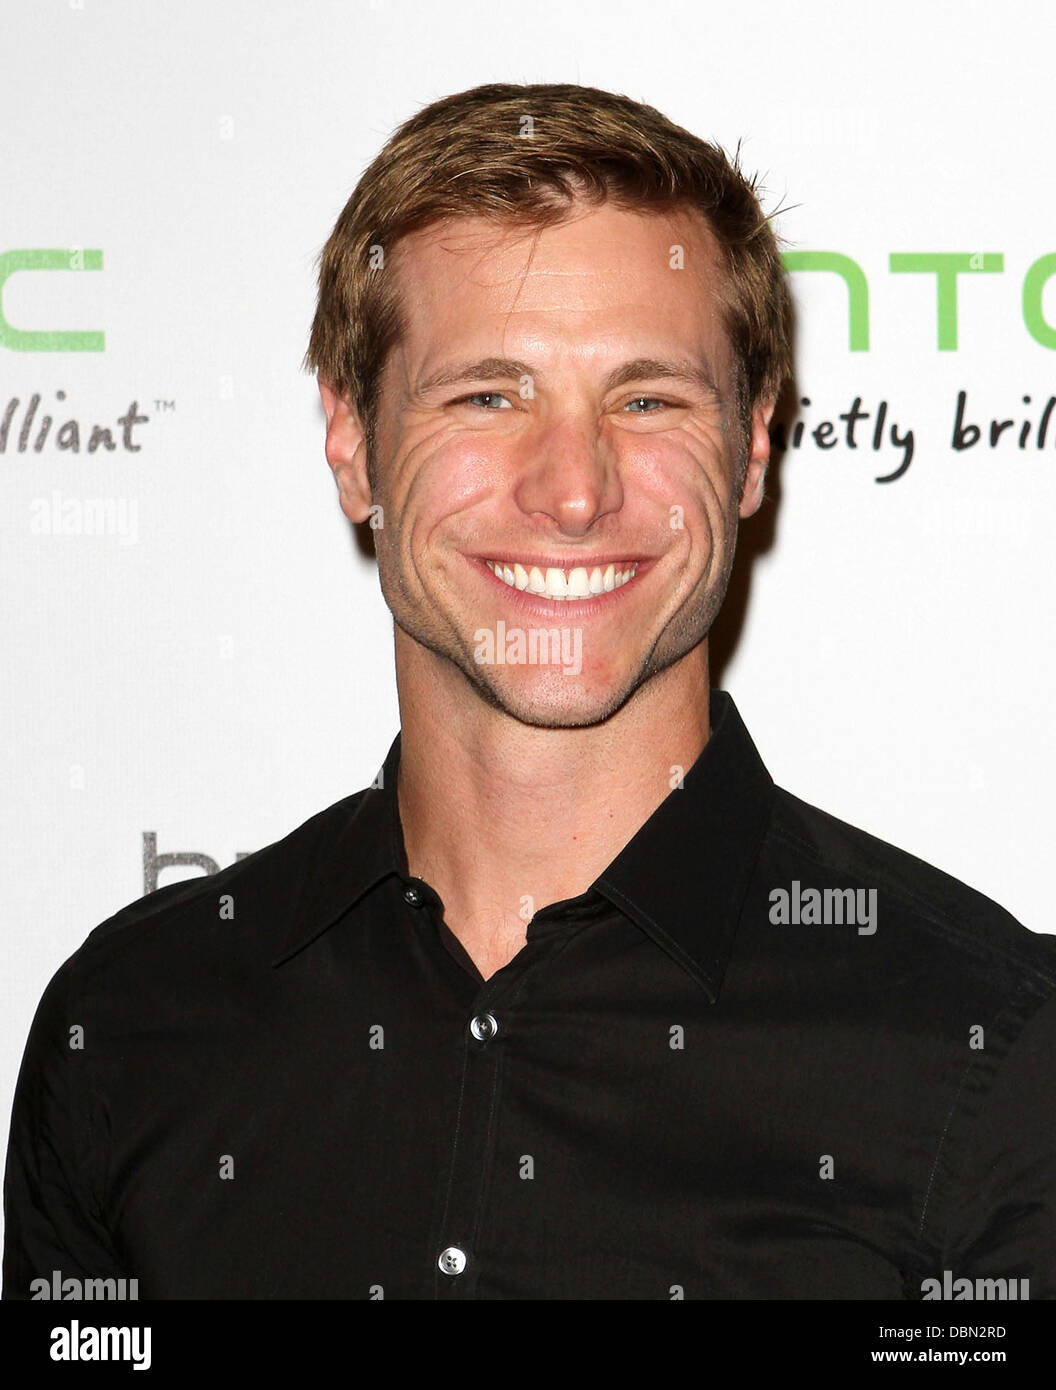 Jake Pavelka The HTC Status Social launch event held at Paramount Studios - Arrivals Los Angeles, California - 19.07.11 Stock Photo